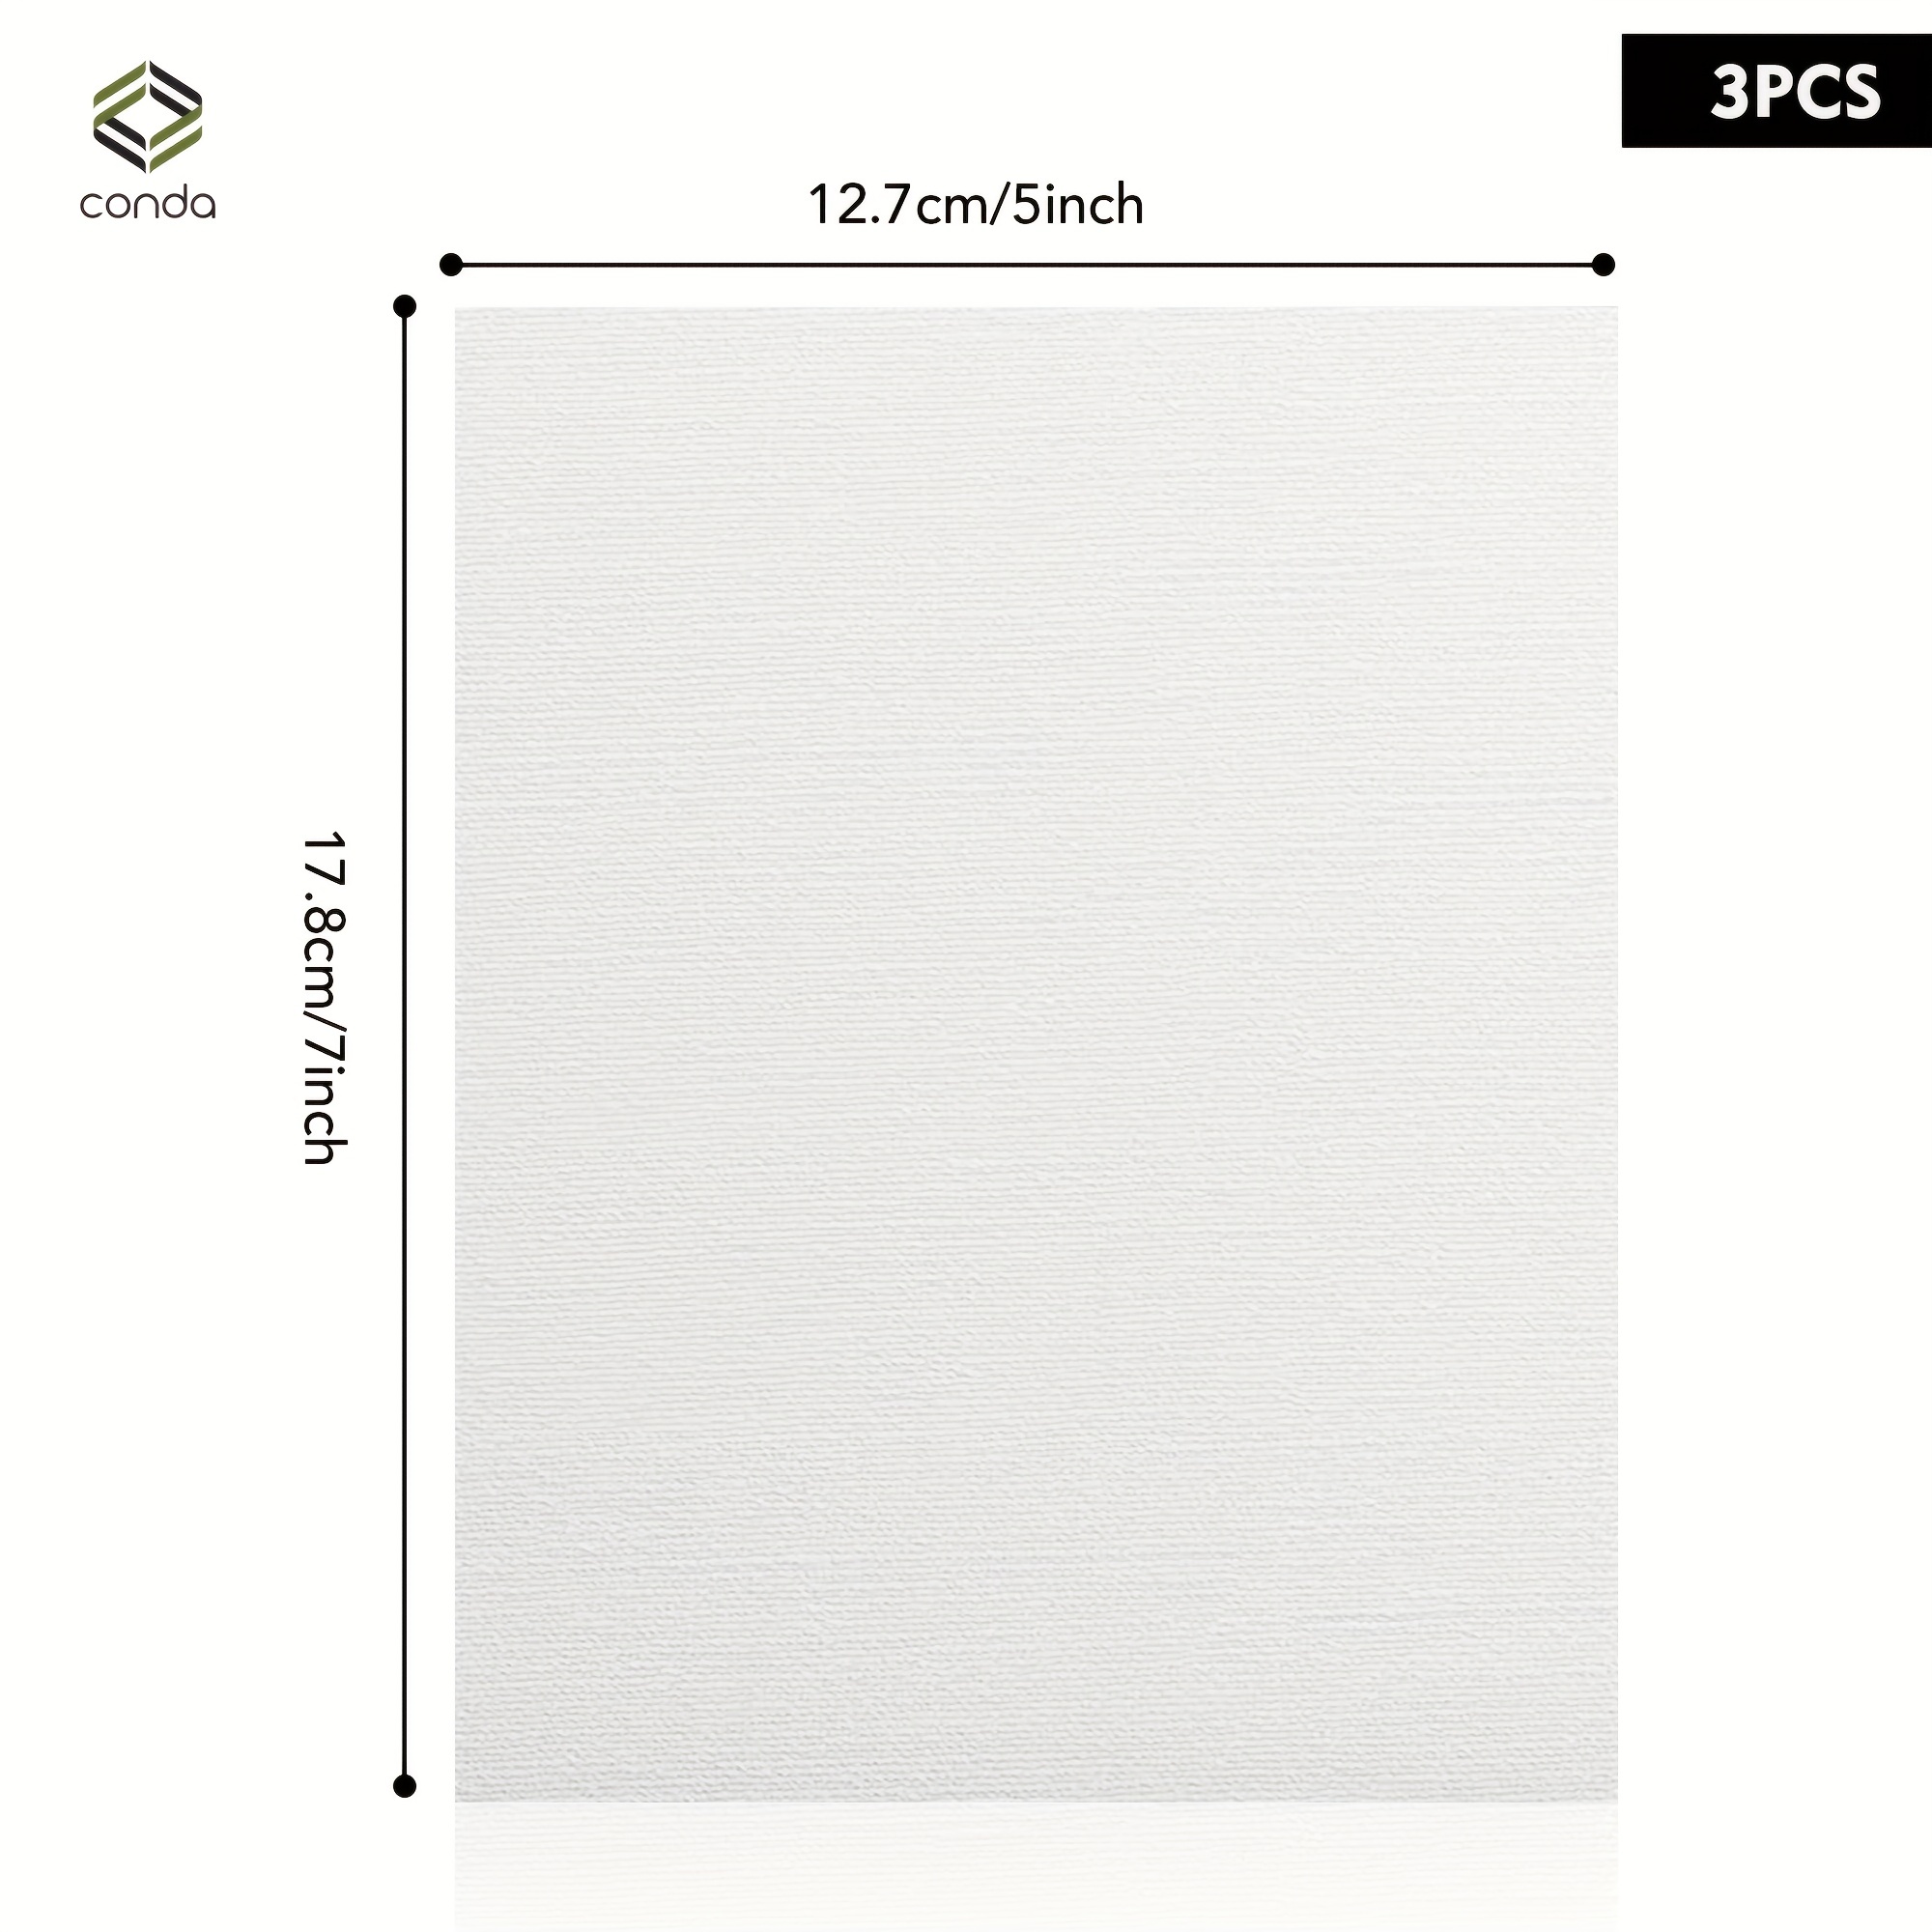 conda Canvases for Painting 5 x 7 inch, 24 Pack Value Bulk Blank White  Canvas Boards, Primed, 100% Cotton, Quality Acid Free Artist Canvas Panels  for